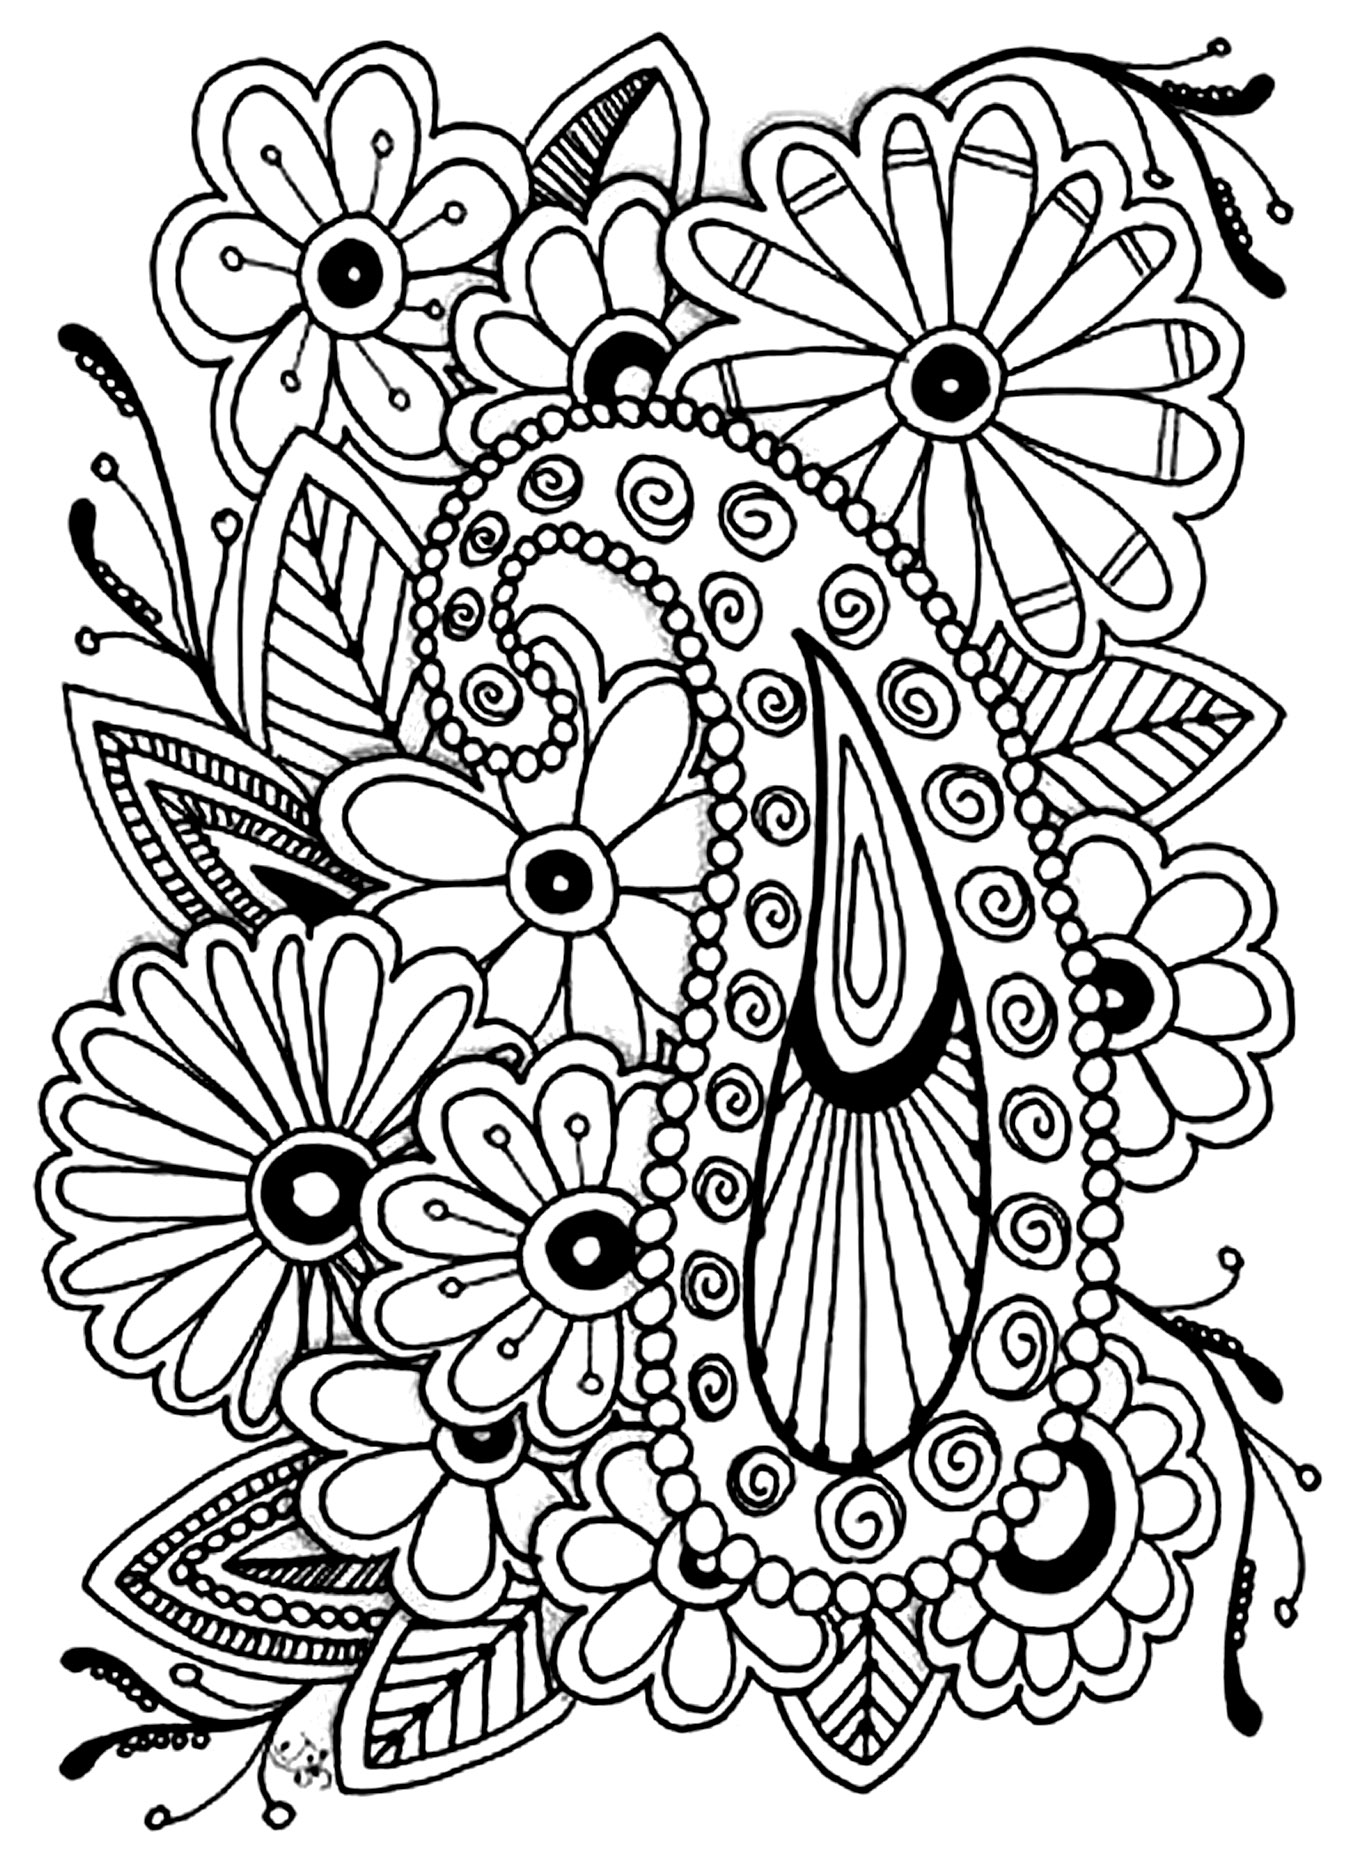 Flowers paisley - Flowers Adult Coloring Pages